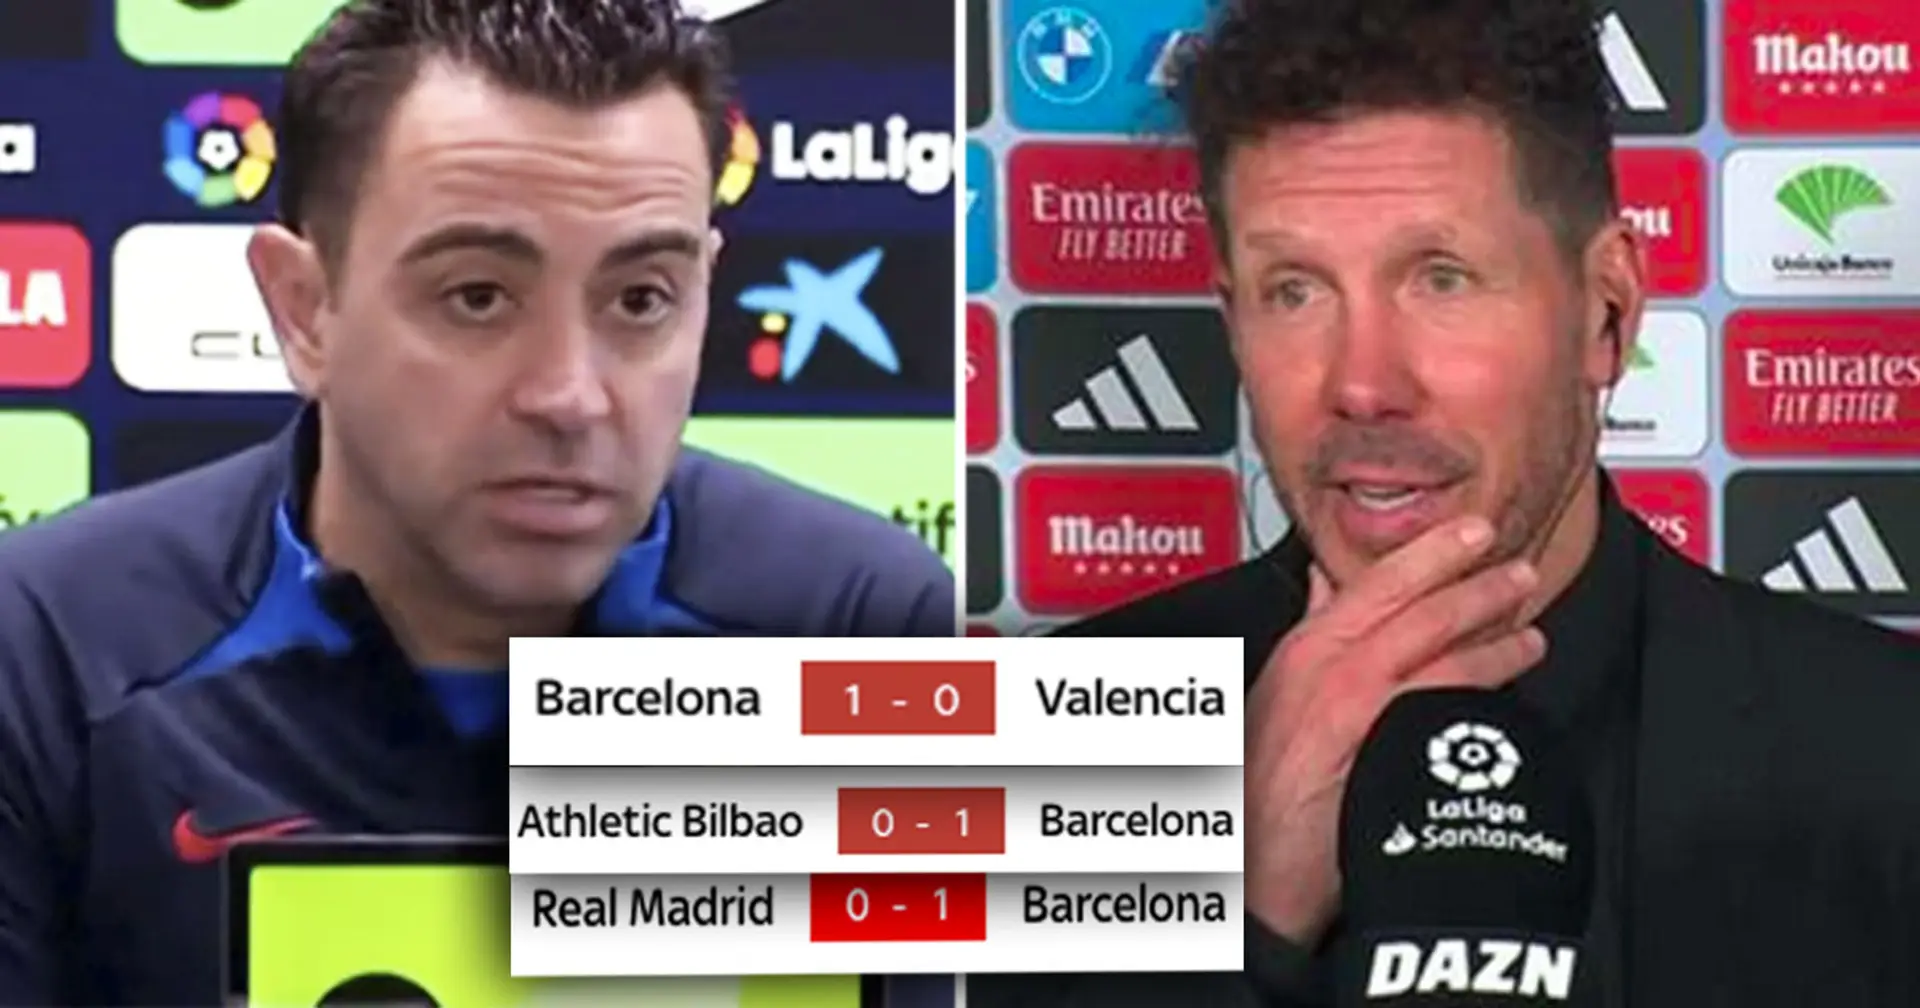 Xavi reacts to Simeone's mocking message for Barca after 3 straight 1-0 wins